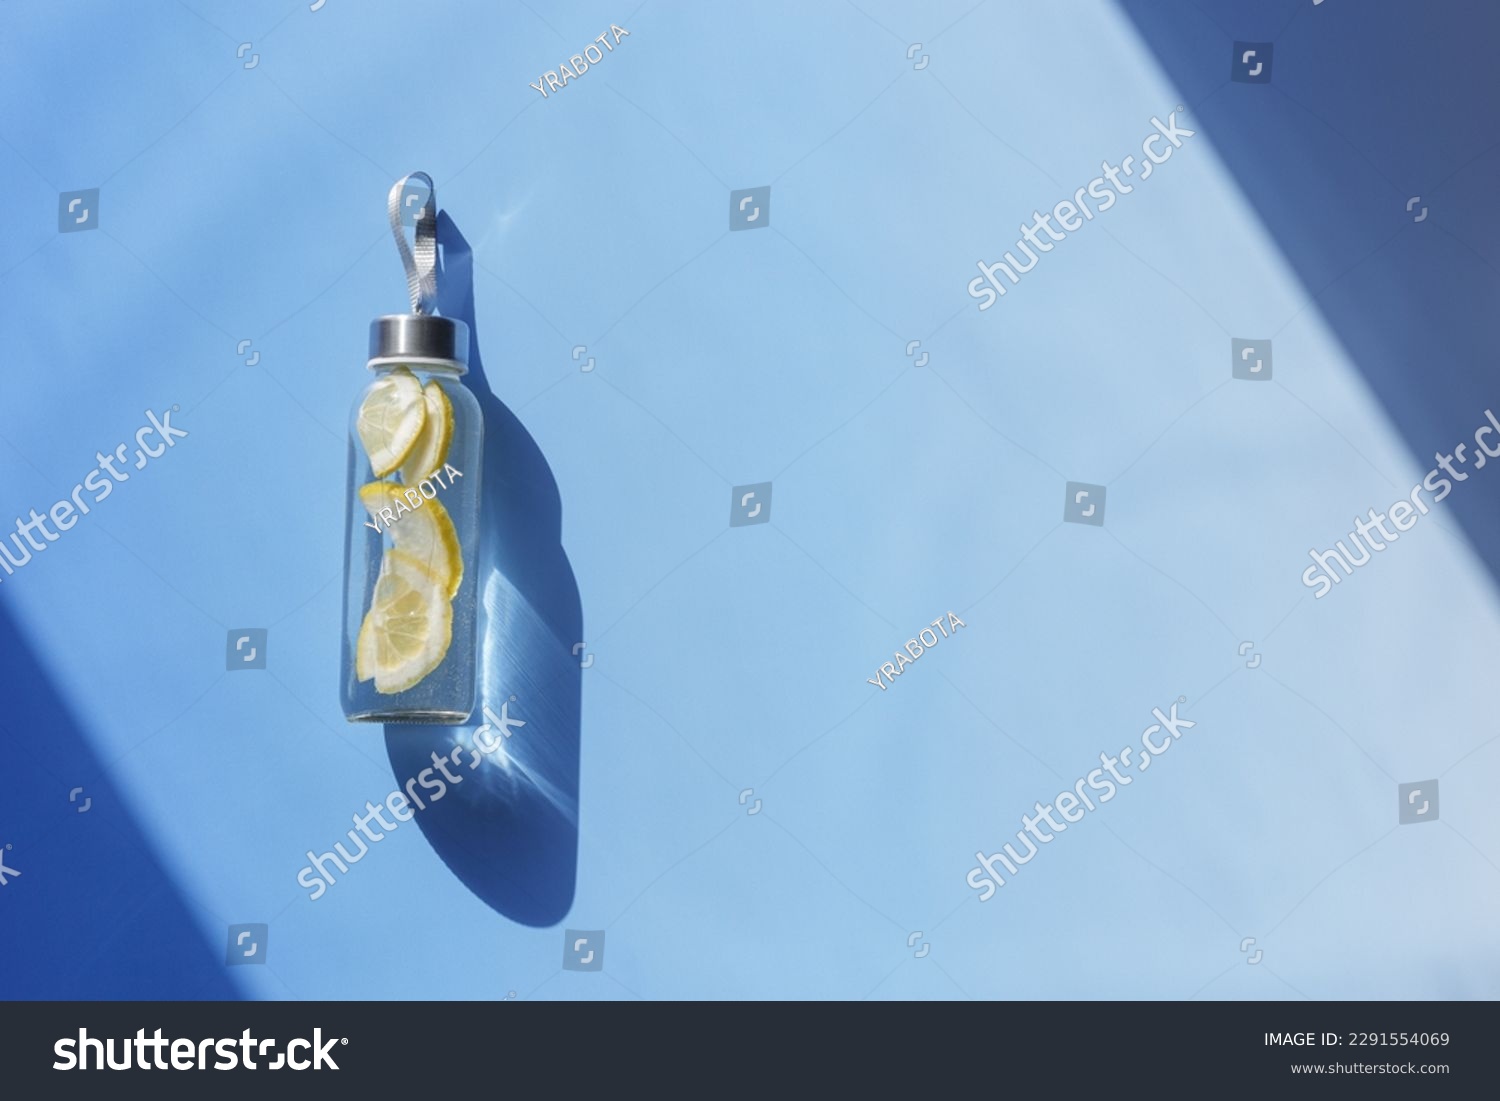 Lemon water drink detox in bottle, hard shadow at sunlight on blue background. Wellness, diet, eating healthy concept. Top view glass reusable water bottle, eco friendly lifestyle, minimal style photo #2291554069